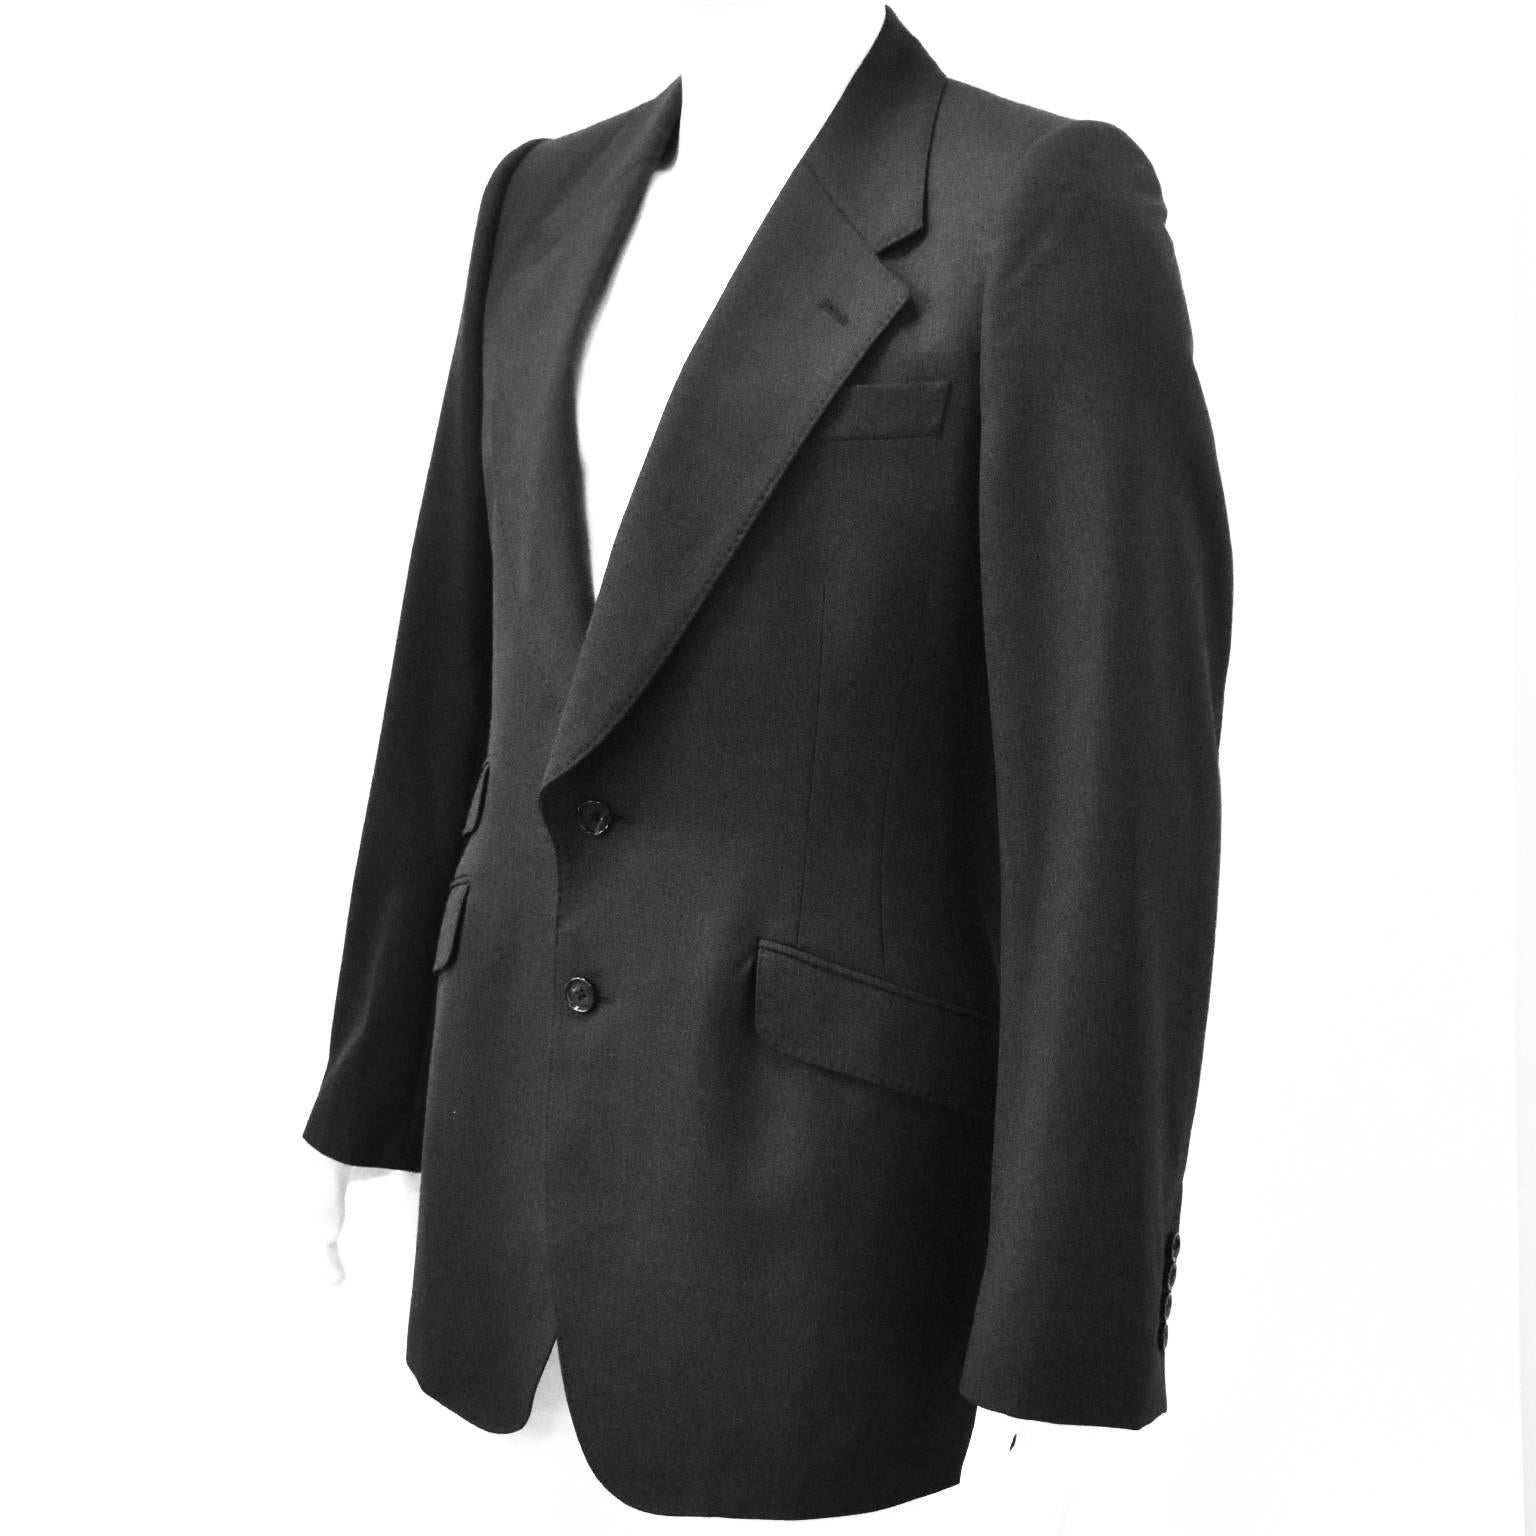 A classic dark grey jacket from Alexander McQueen’s menswear line.
The jacket has an elegantly tailored design with notched collar, button fastening and darts at the waist that lightly creates shape in the waist. It also features four front pockets;